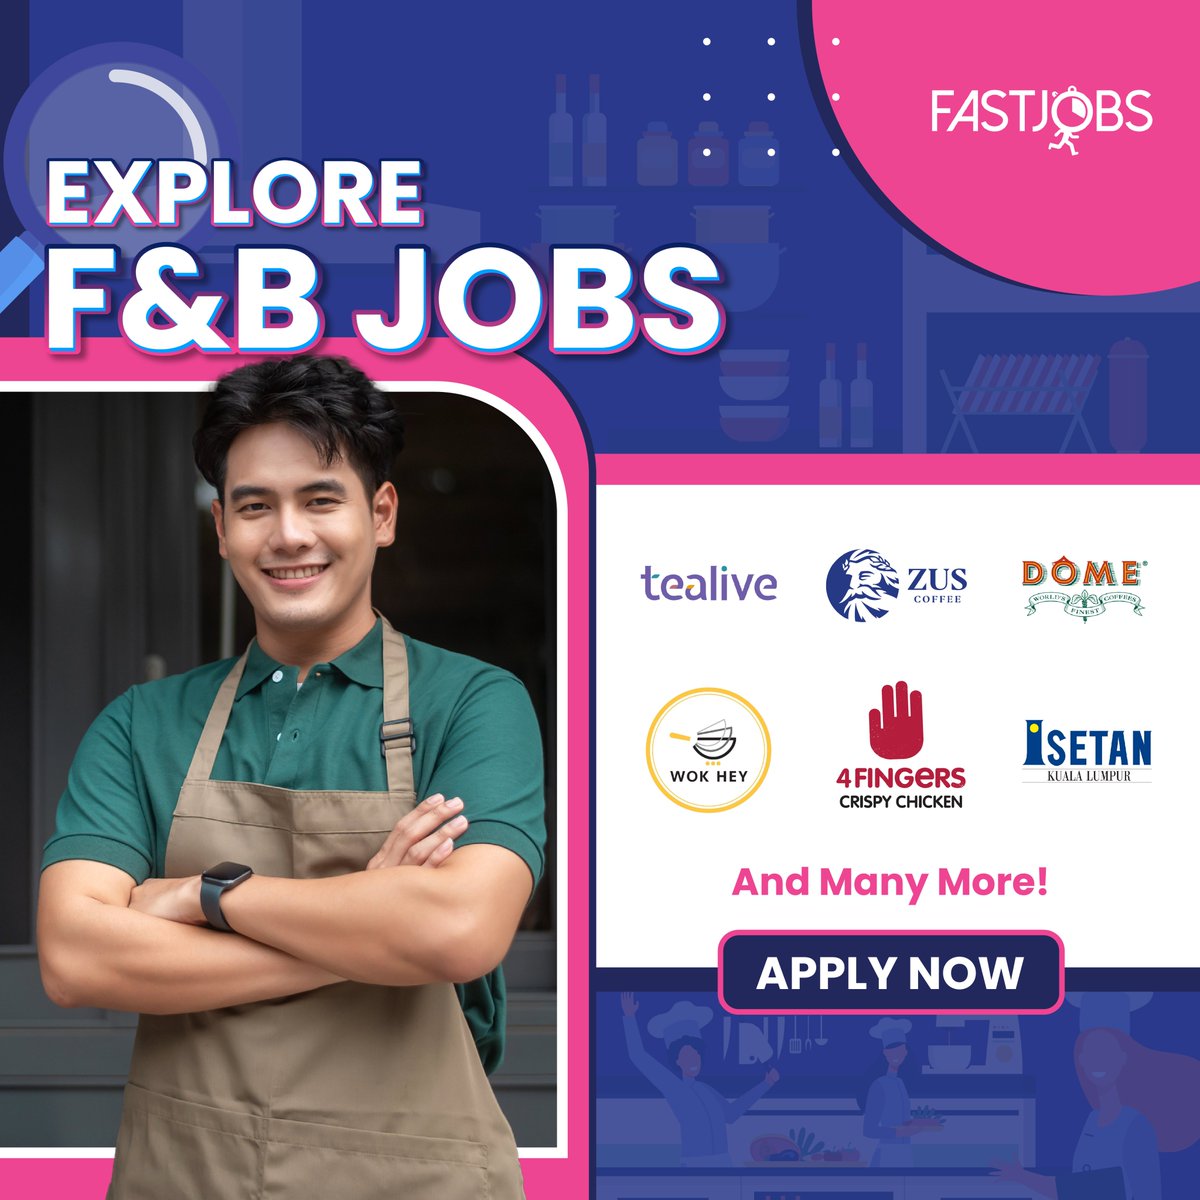 Check out these Top F&B brands across Malaysia!
- Tealive tinyurl.com/mm78hrsz
- ZUS Coffee tinyurl.com/yfsy8tt3
- 4 Finger tinyurl.com/2yc7yzbb
- Isetan tinyurl.com/y8sycv99
And more!  Apply now with FastJobs!  
#JobSearch #NowHiring #HiringNow #ApplyNow #fastjobs